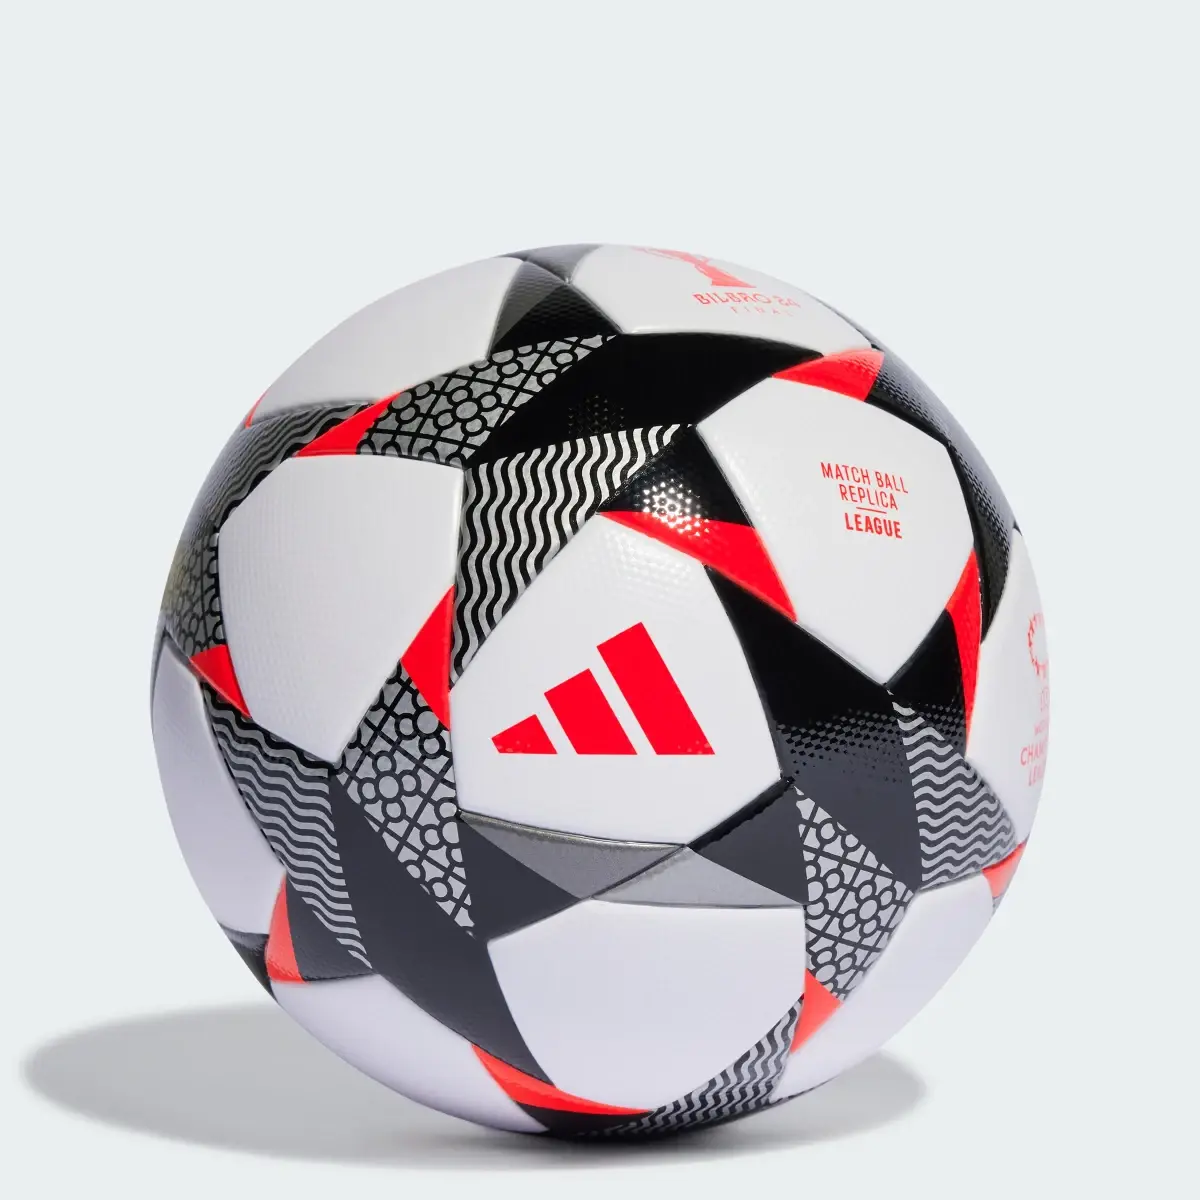 Adidas UWCL League 23/24 Knock-out Ball. 1